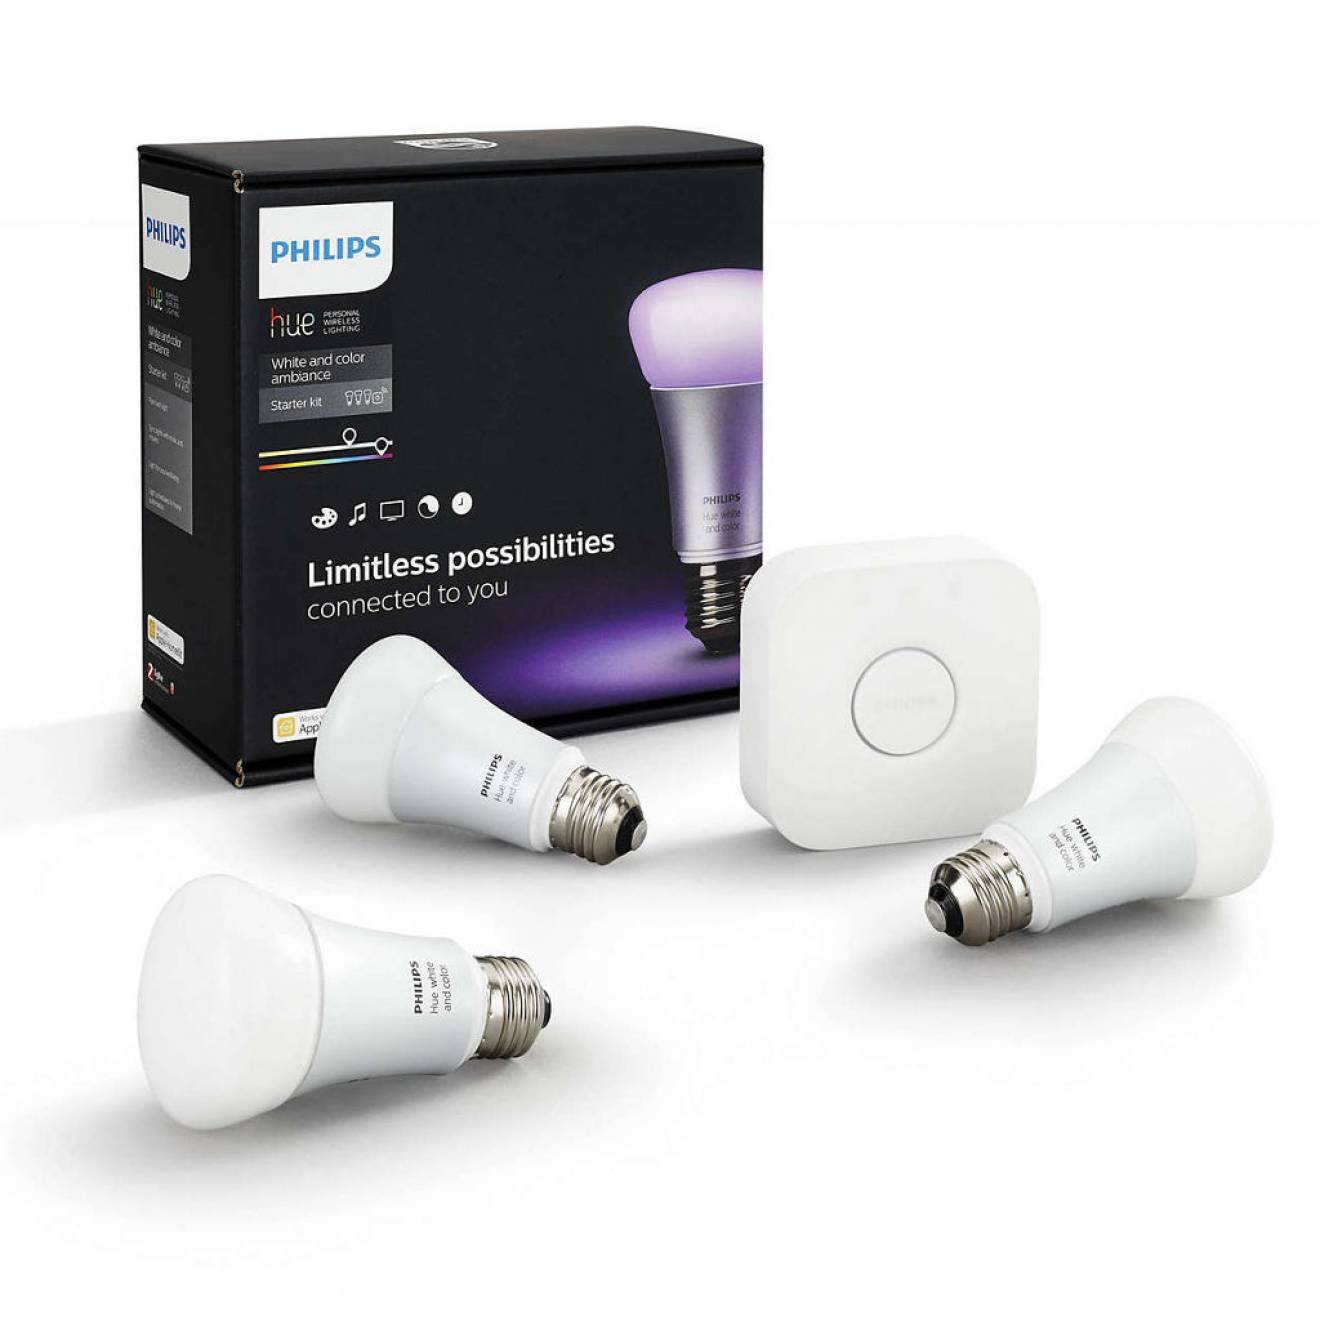 Philips hue Starter kit 3x RGBW A60 10W E27 bombilla LED y puente 2.0